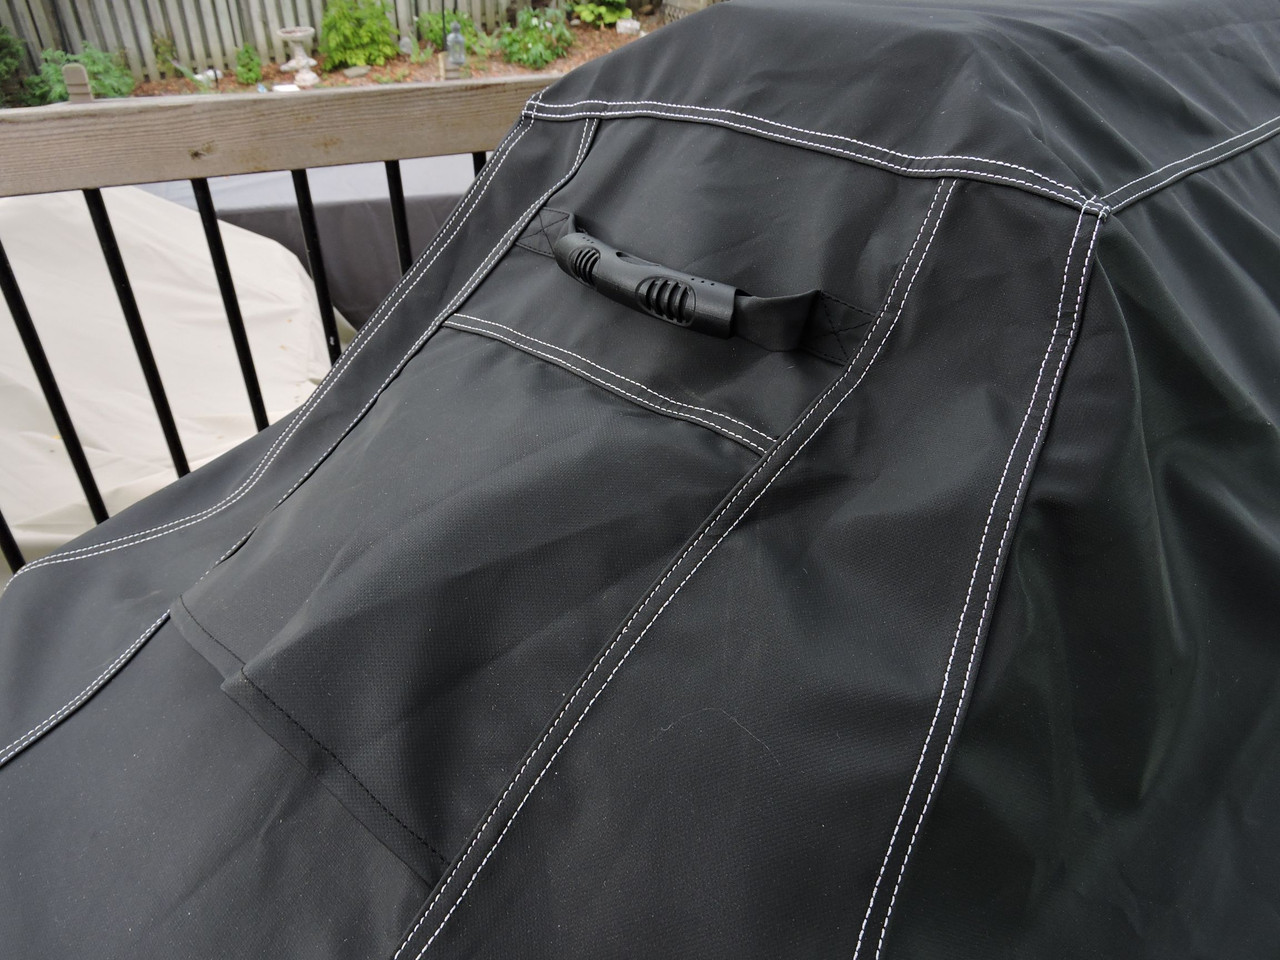 Tundra Supreme Grill Cover; Comfortable sure grip handles and critical air vents for circulation